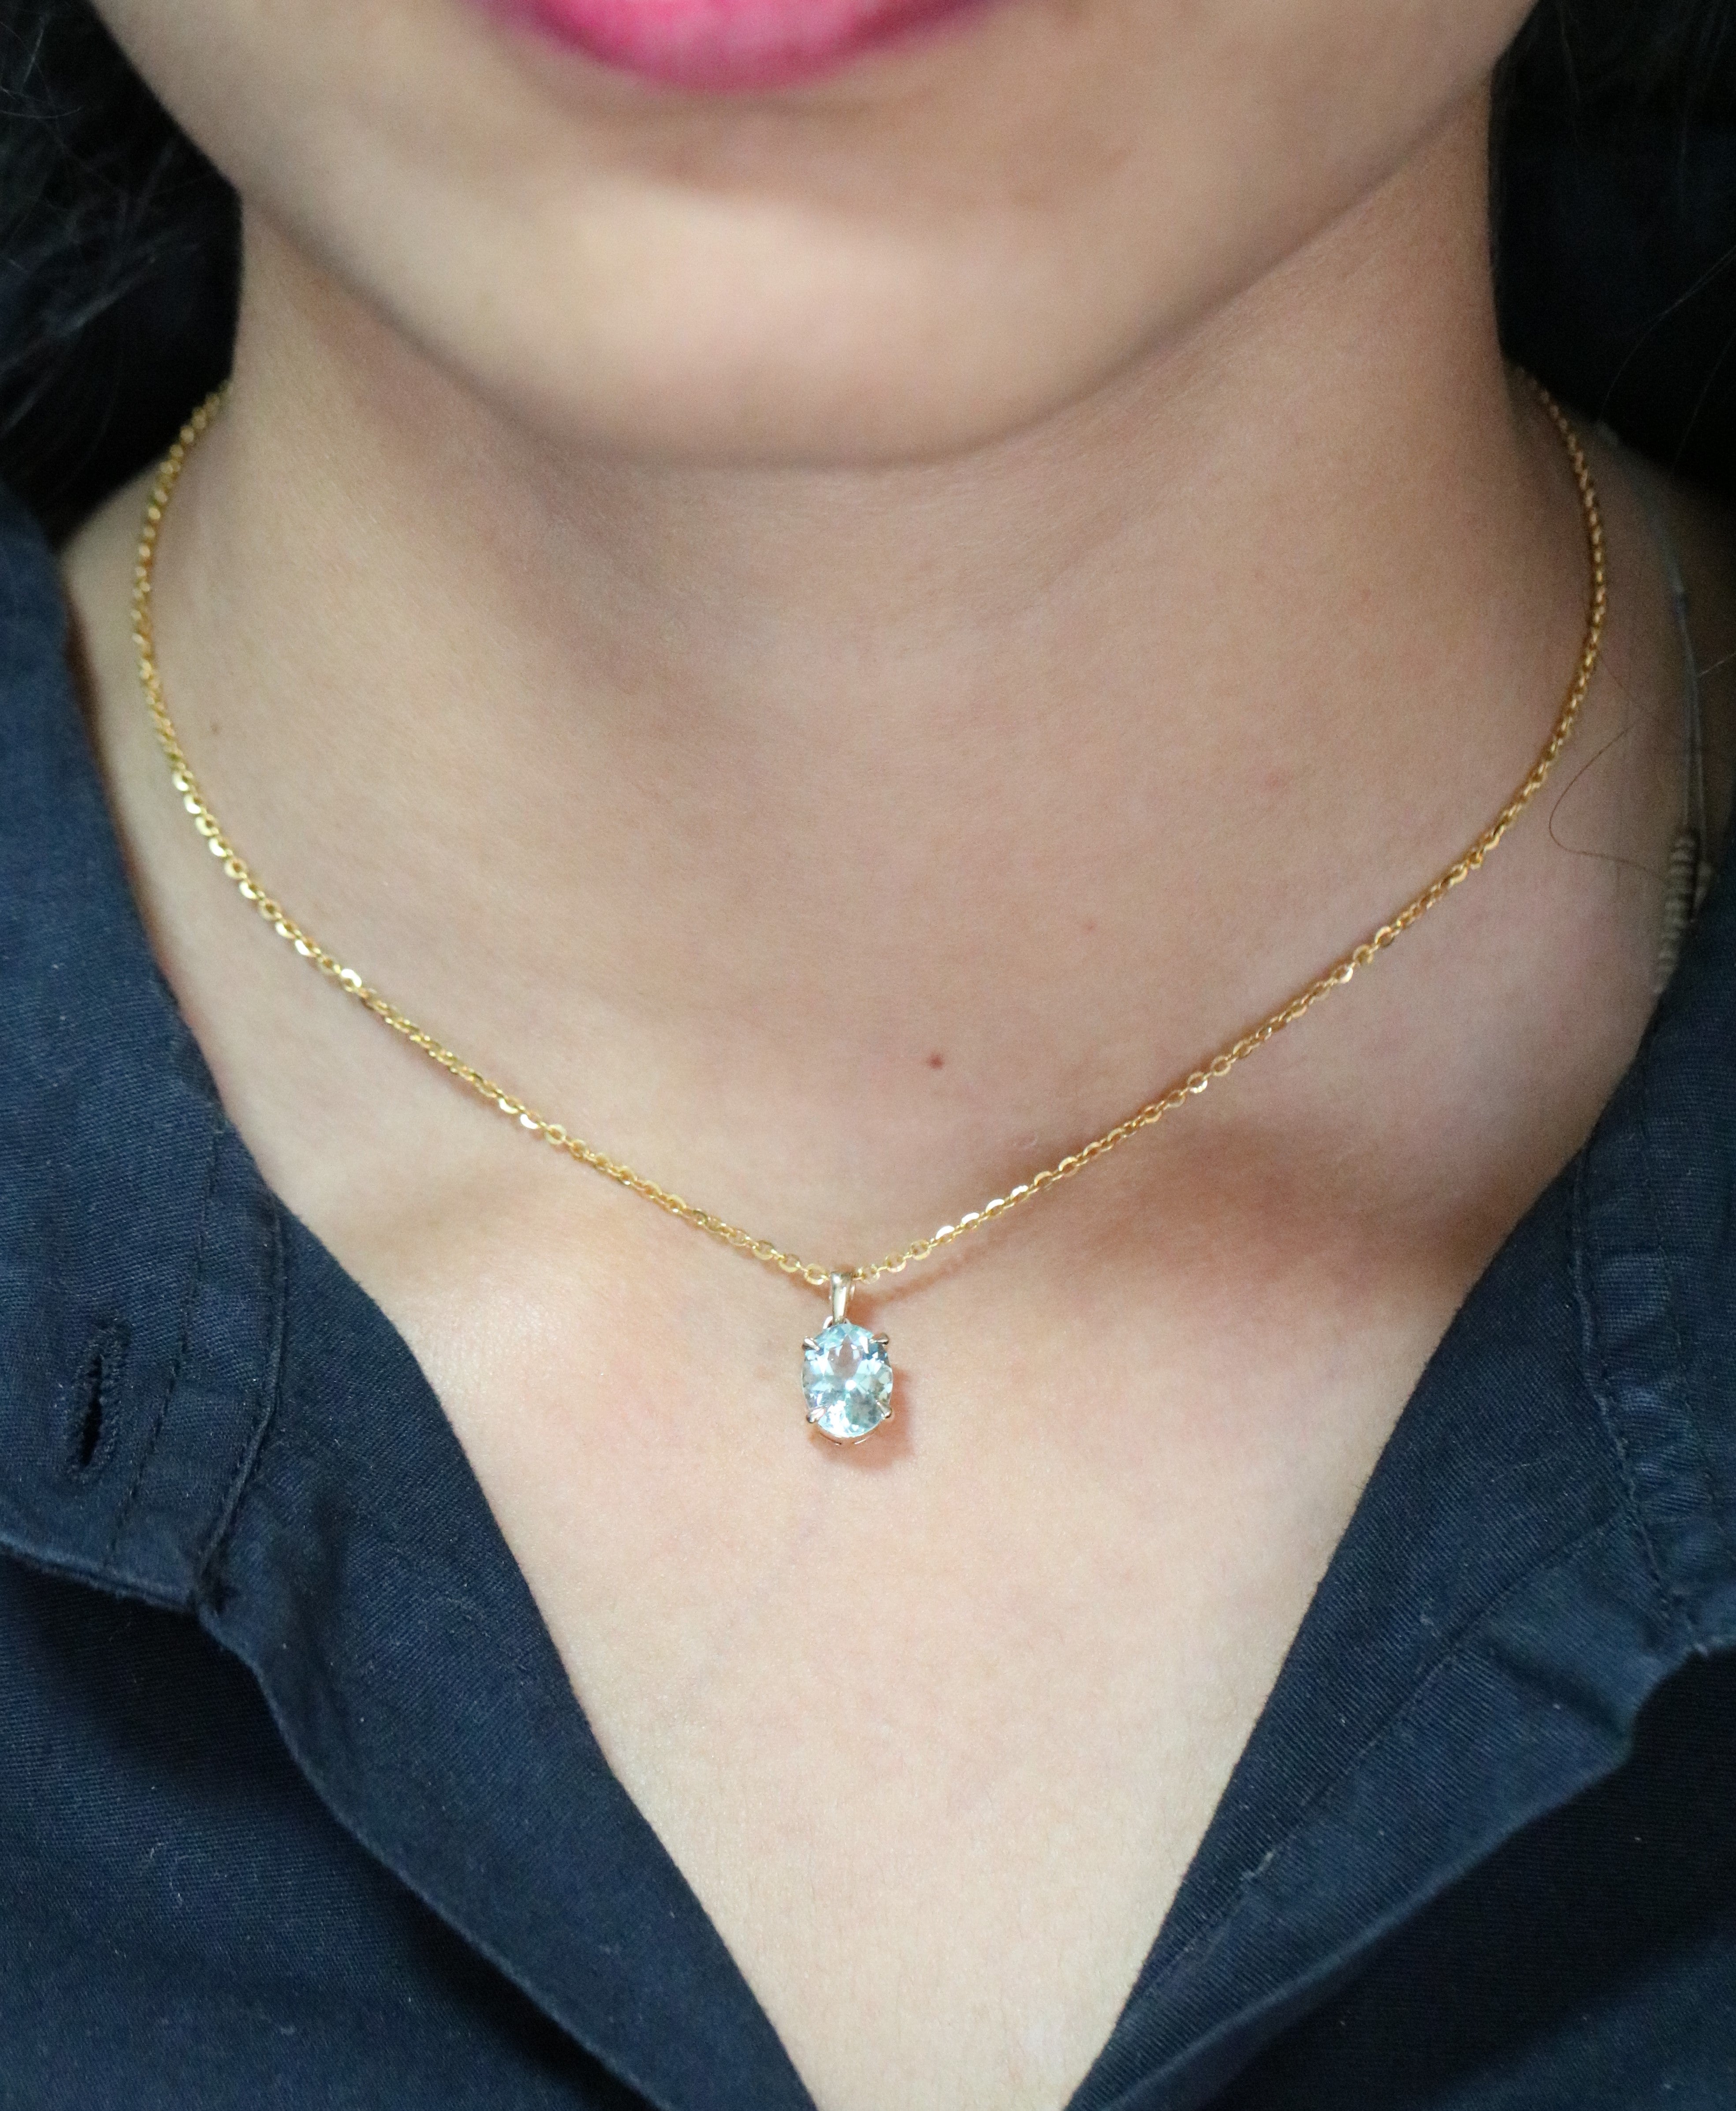 Green Aquamarine Oval Stone Pendant with 18K Yellow Gold Chain Necklace